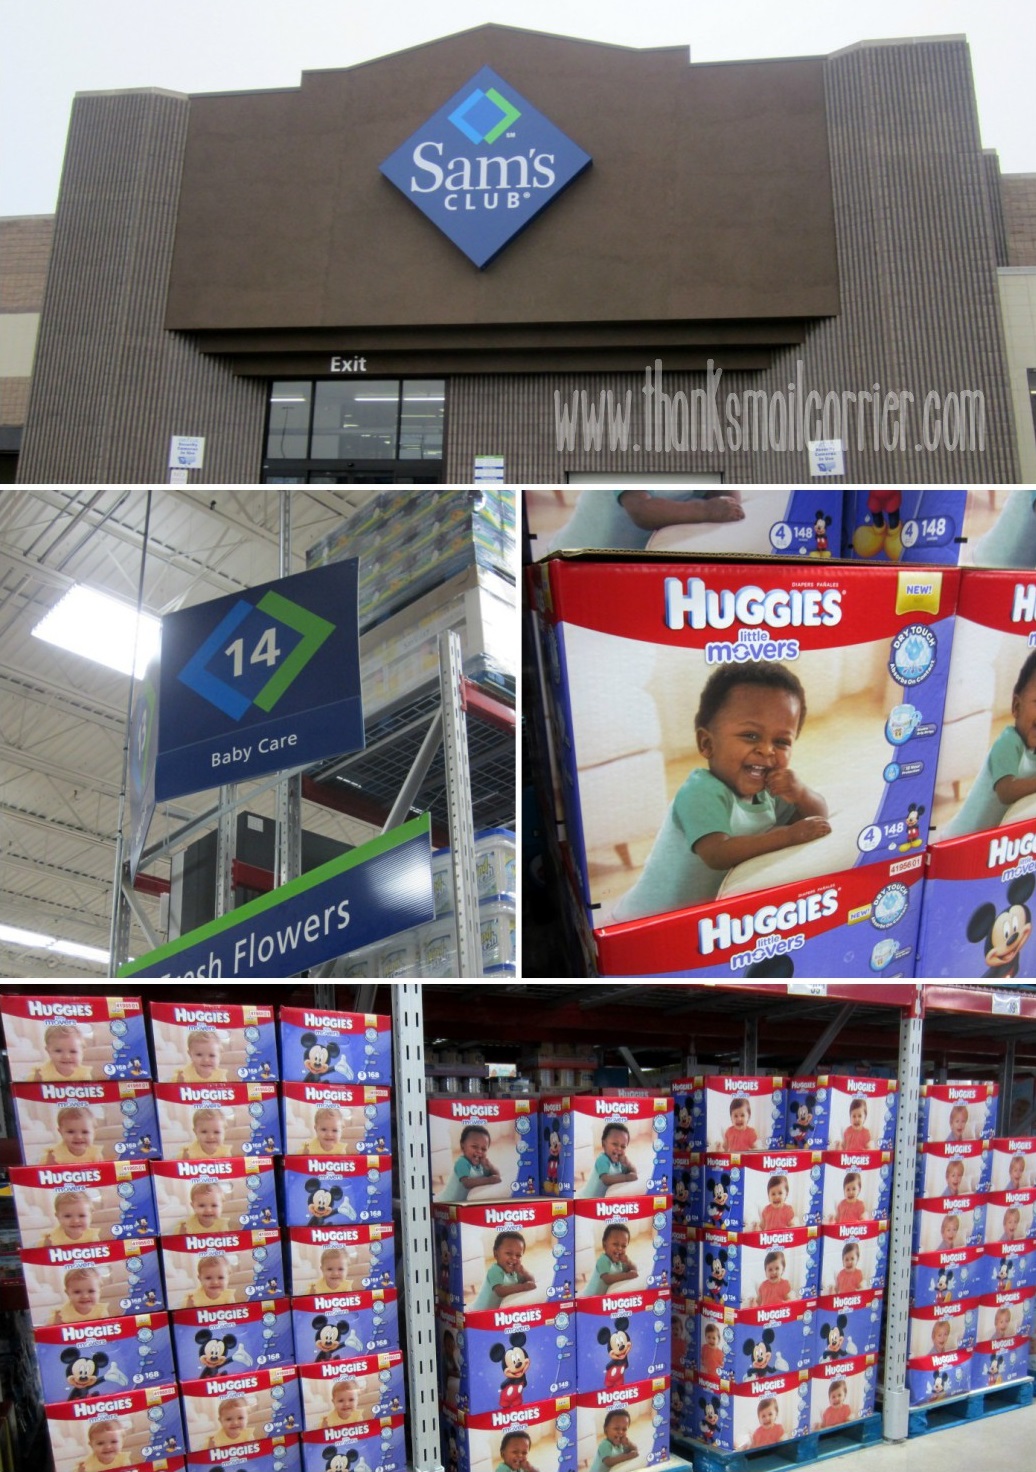 Huggies Little Movers at Sam's Club